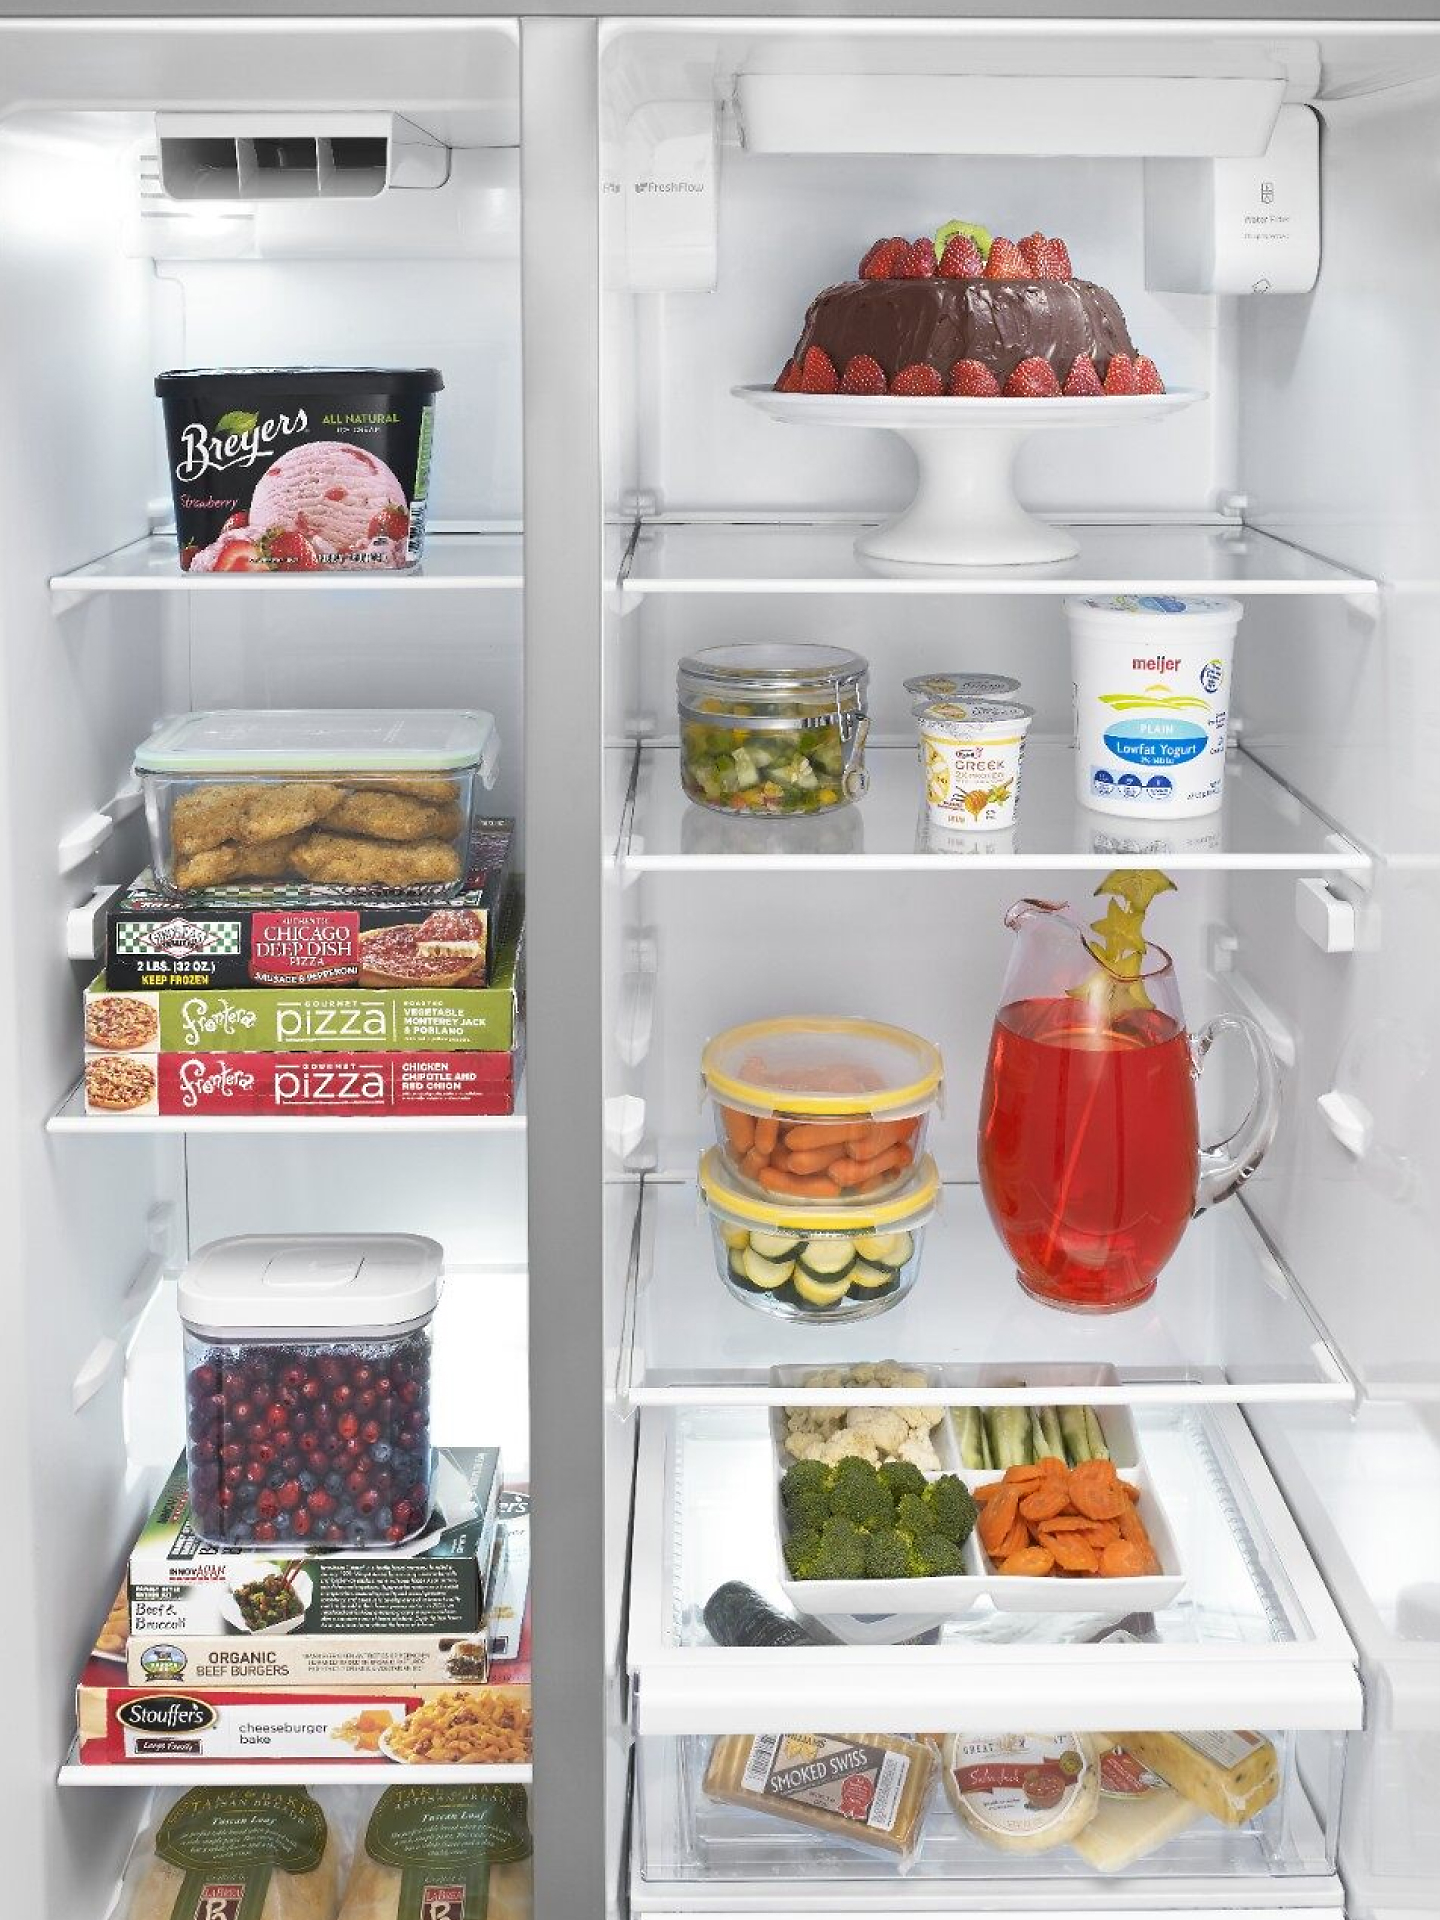 https://kitchenaid-h.assetsadobe.com/is/image/content/dam/business-unit/whirlpoolv2/en-us/marketing-content/site-assets/page-content/oc-articles/how-to-organize-a-refrigerator/How_to_Organize_a_Refer_Image%201.jpg?fmt=png-alpha&qlt=85,0&resMode=sharp2&op_usm=1.75,0.3,2,0&scl=1&constrain=fit,1